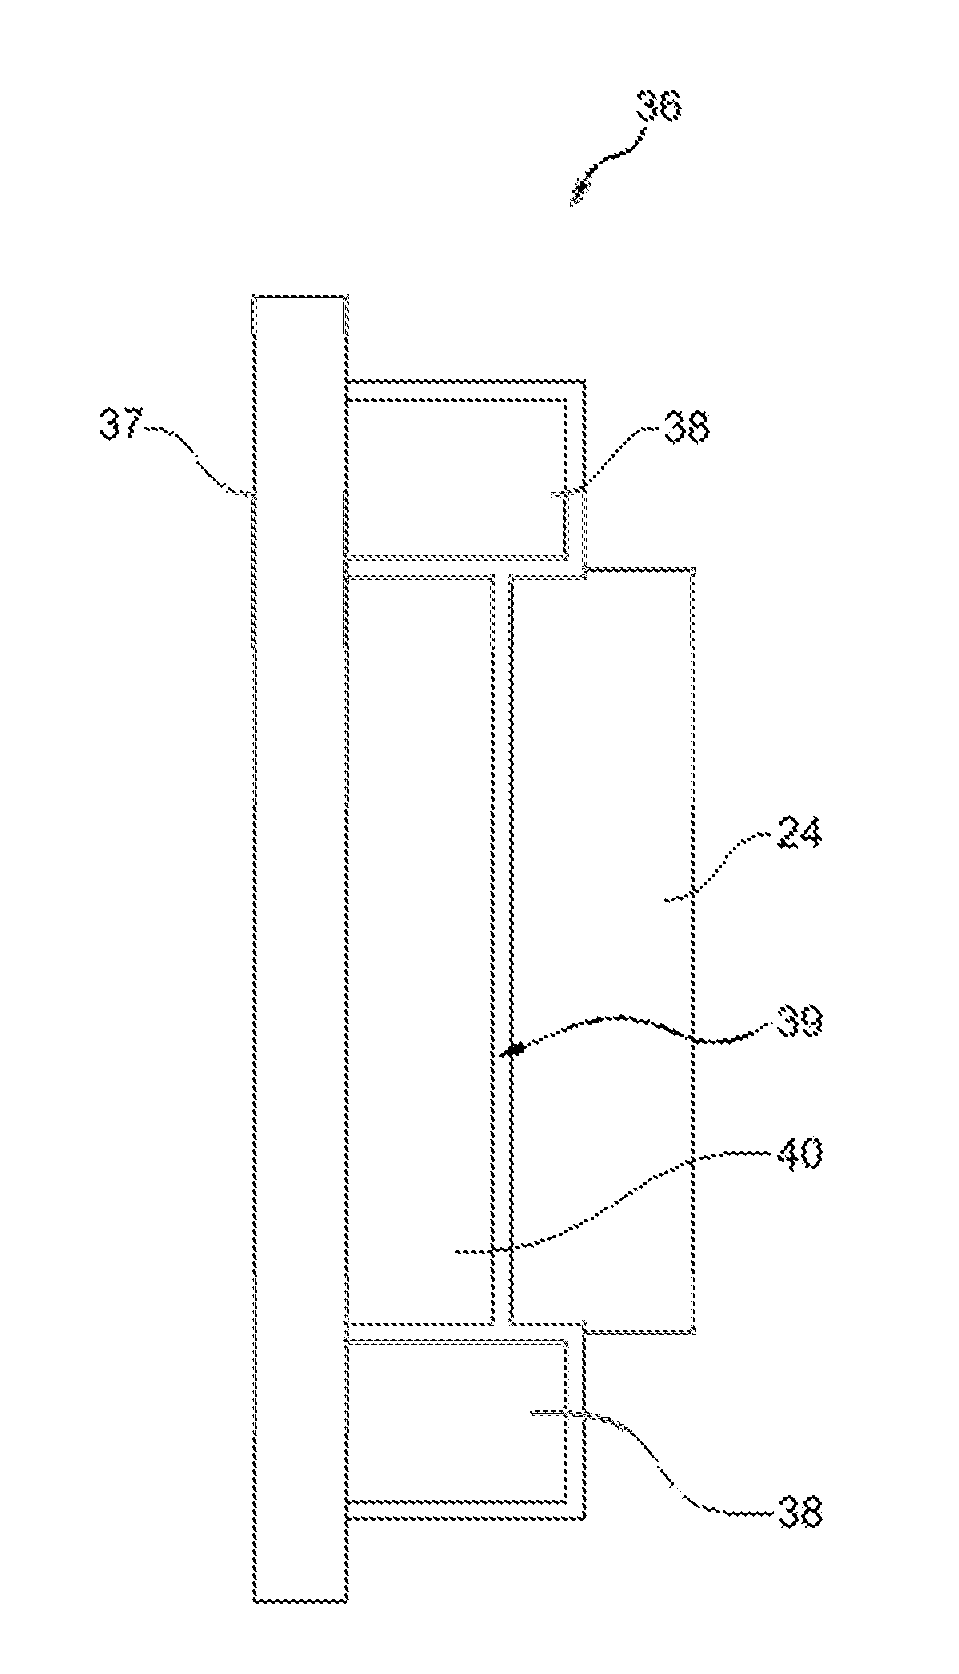 Sensor for contactless electrocardiographic measurement